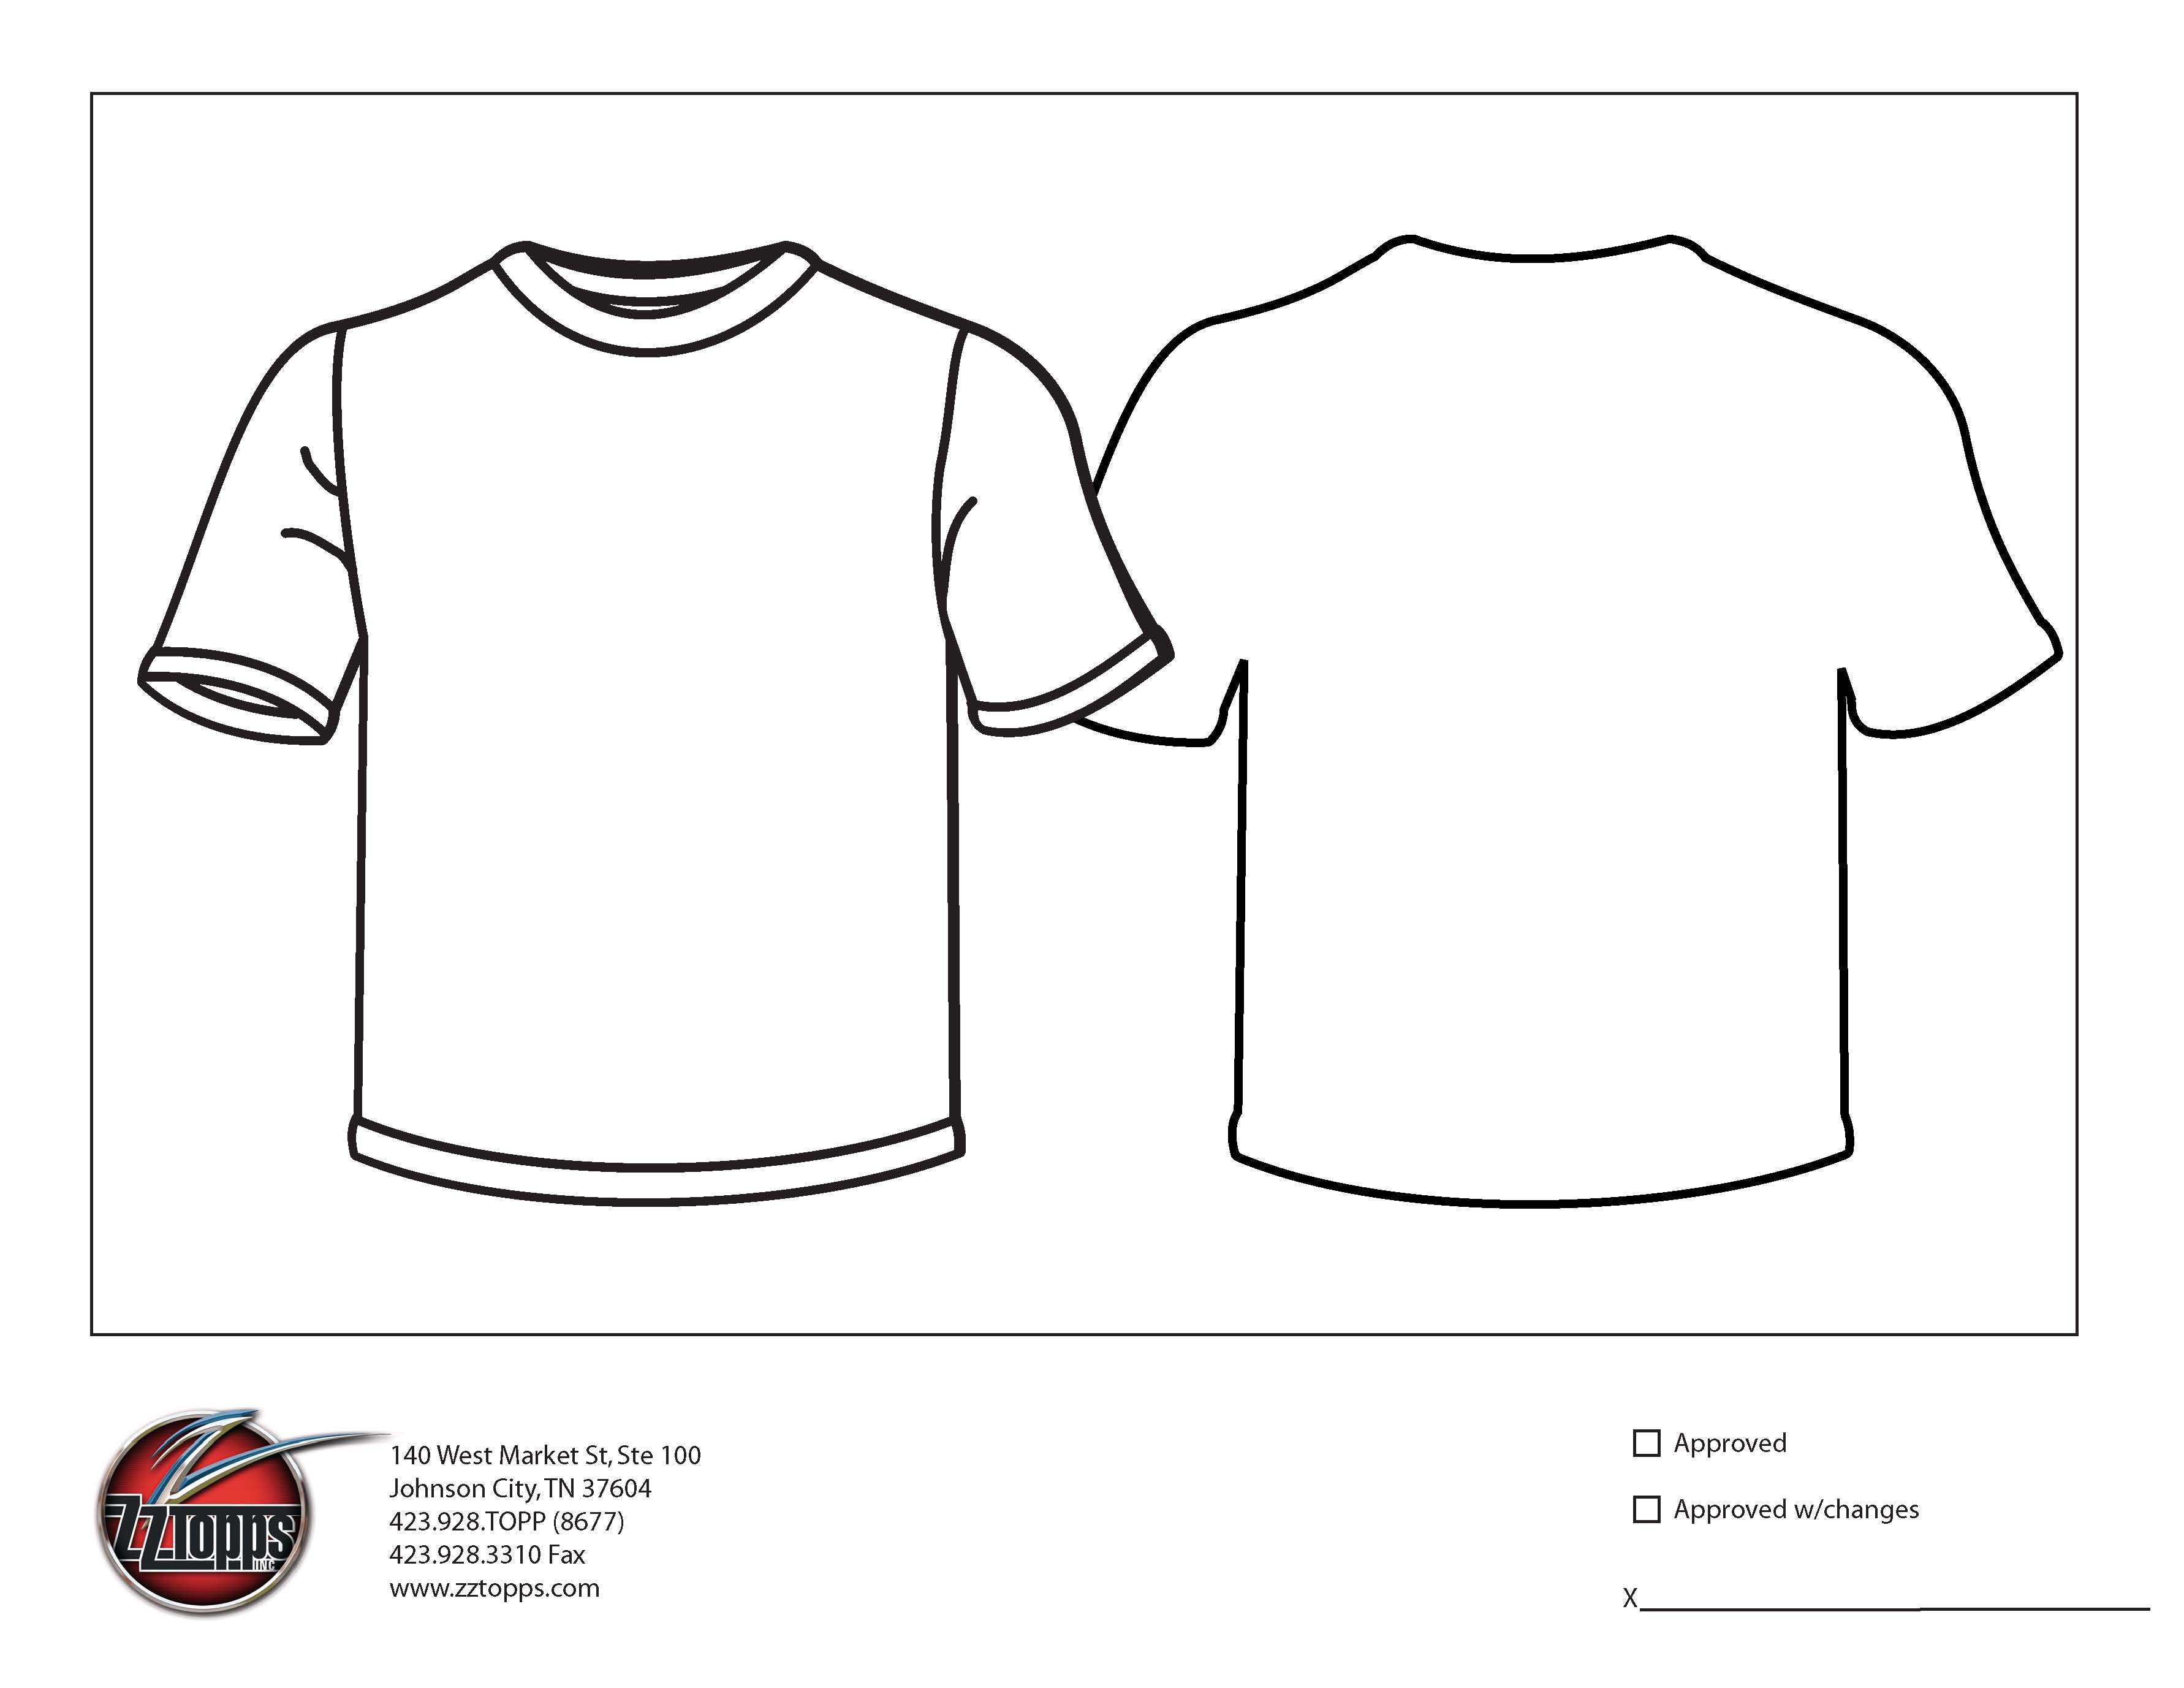 Buy design your own t shirt template - 25% OFF! For Blank T Shirt Order Form Template